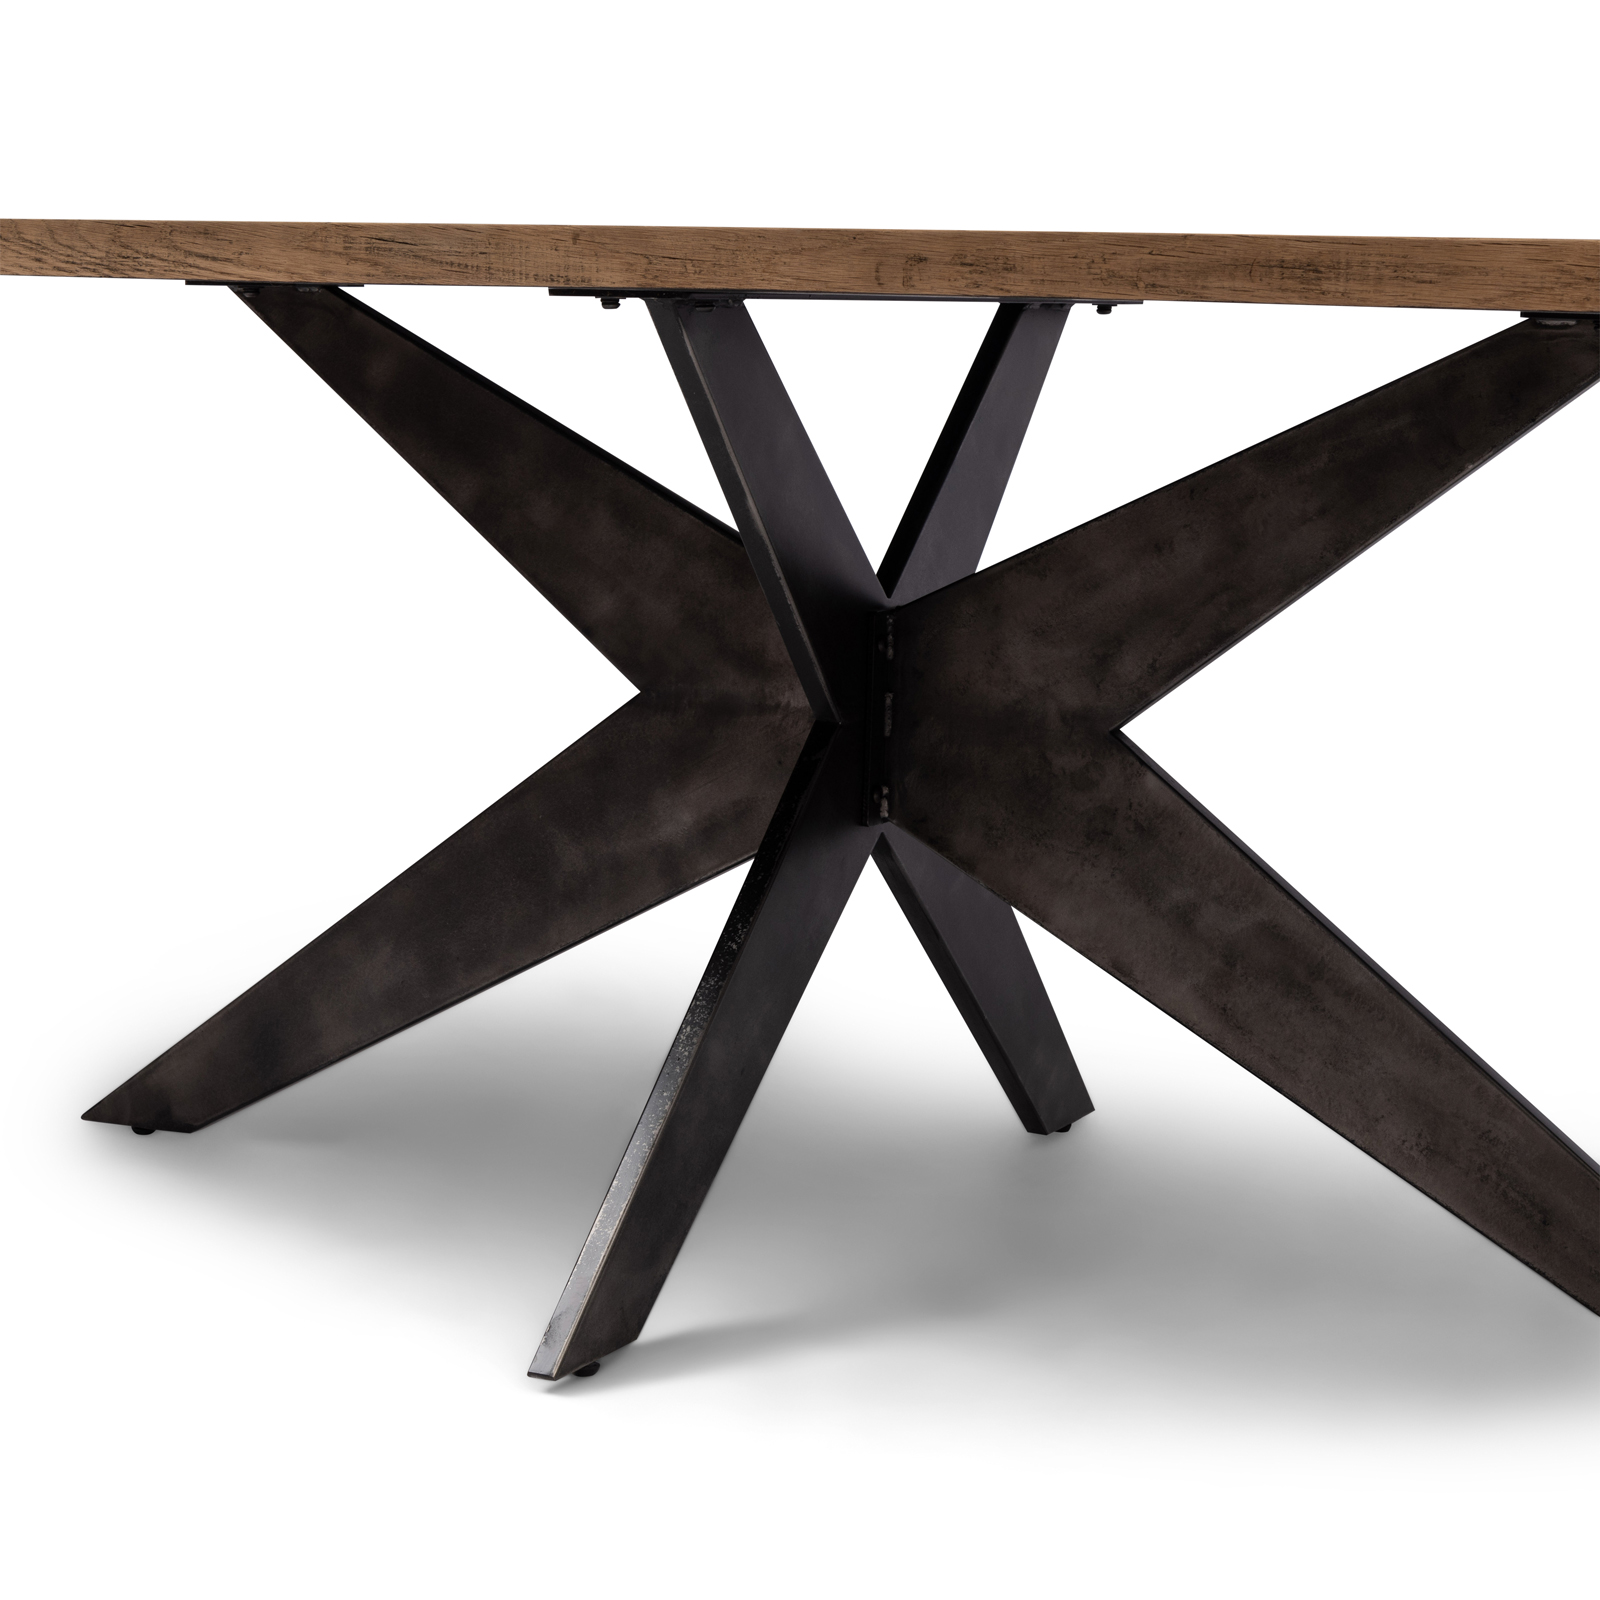 Falcon Crest Dining Table, 230x100 cm